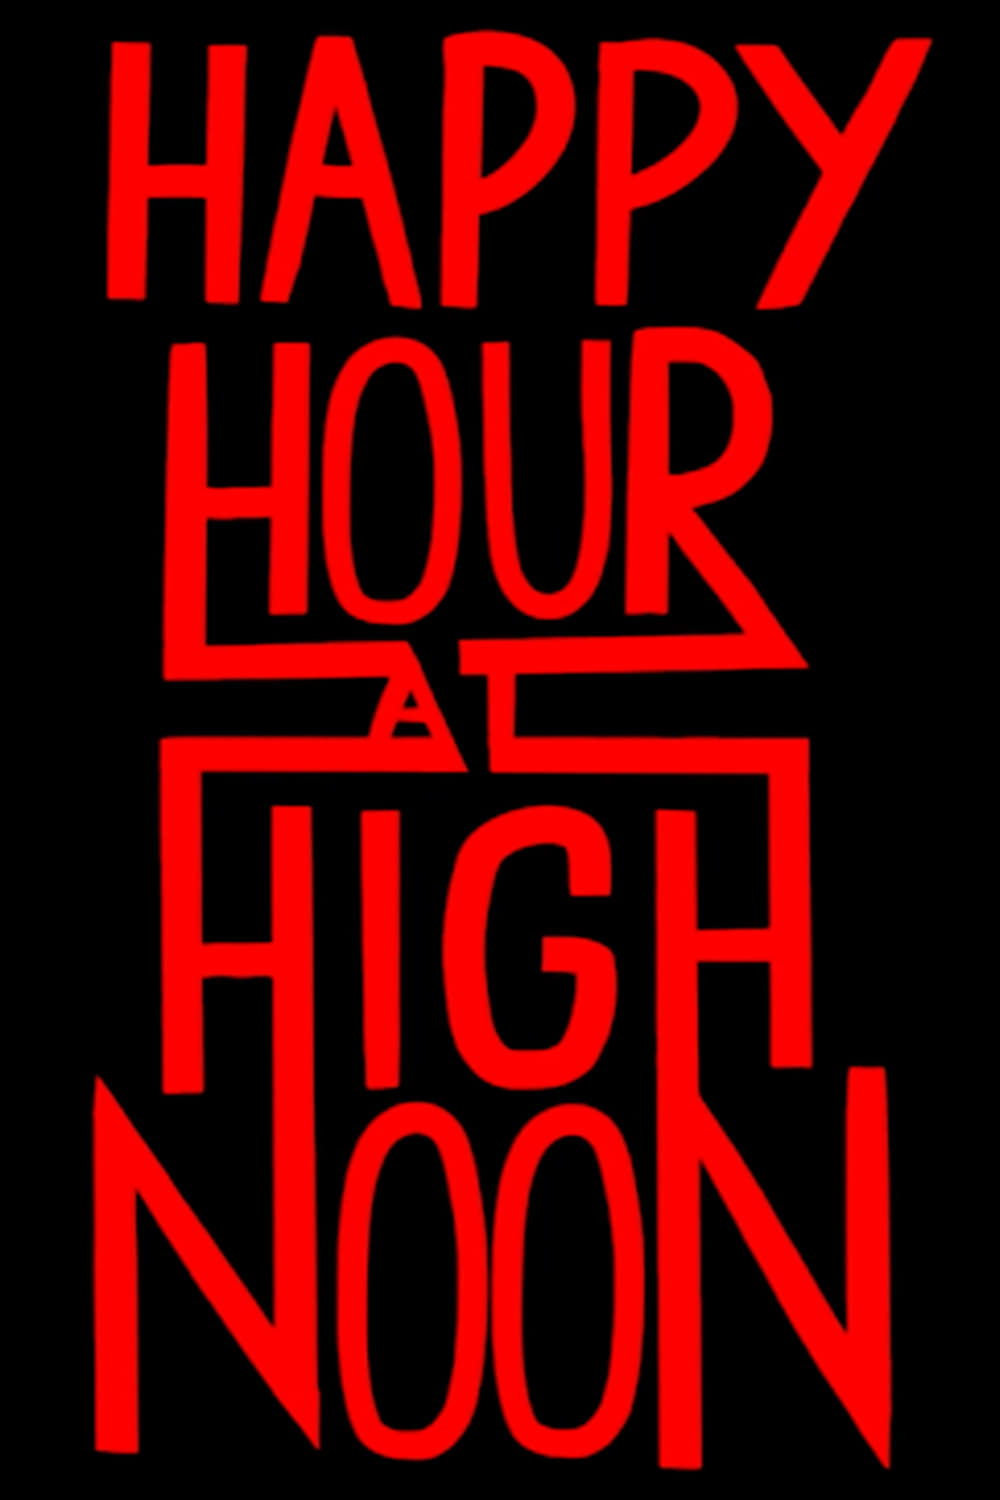 Happy Hour at High Noon